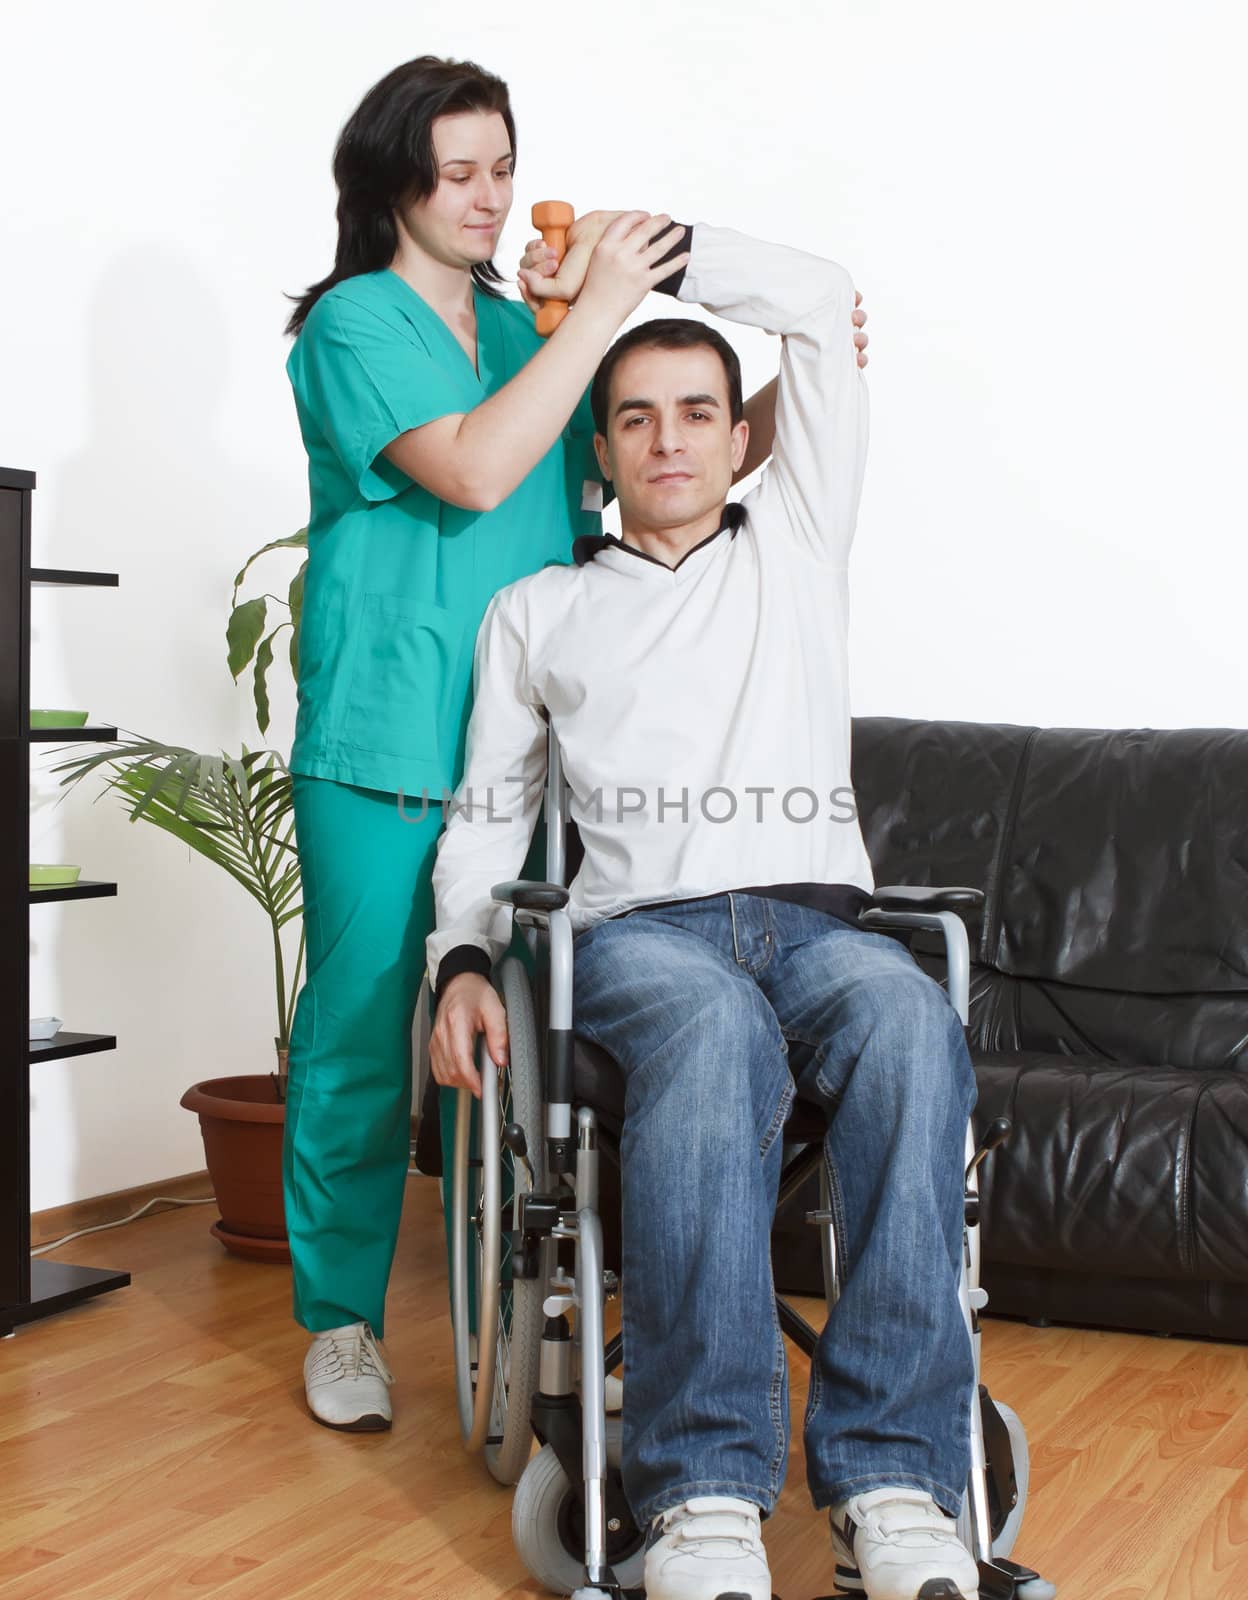 Physical therapist working with patient by manaemedia